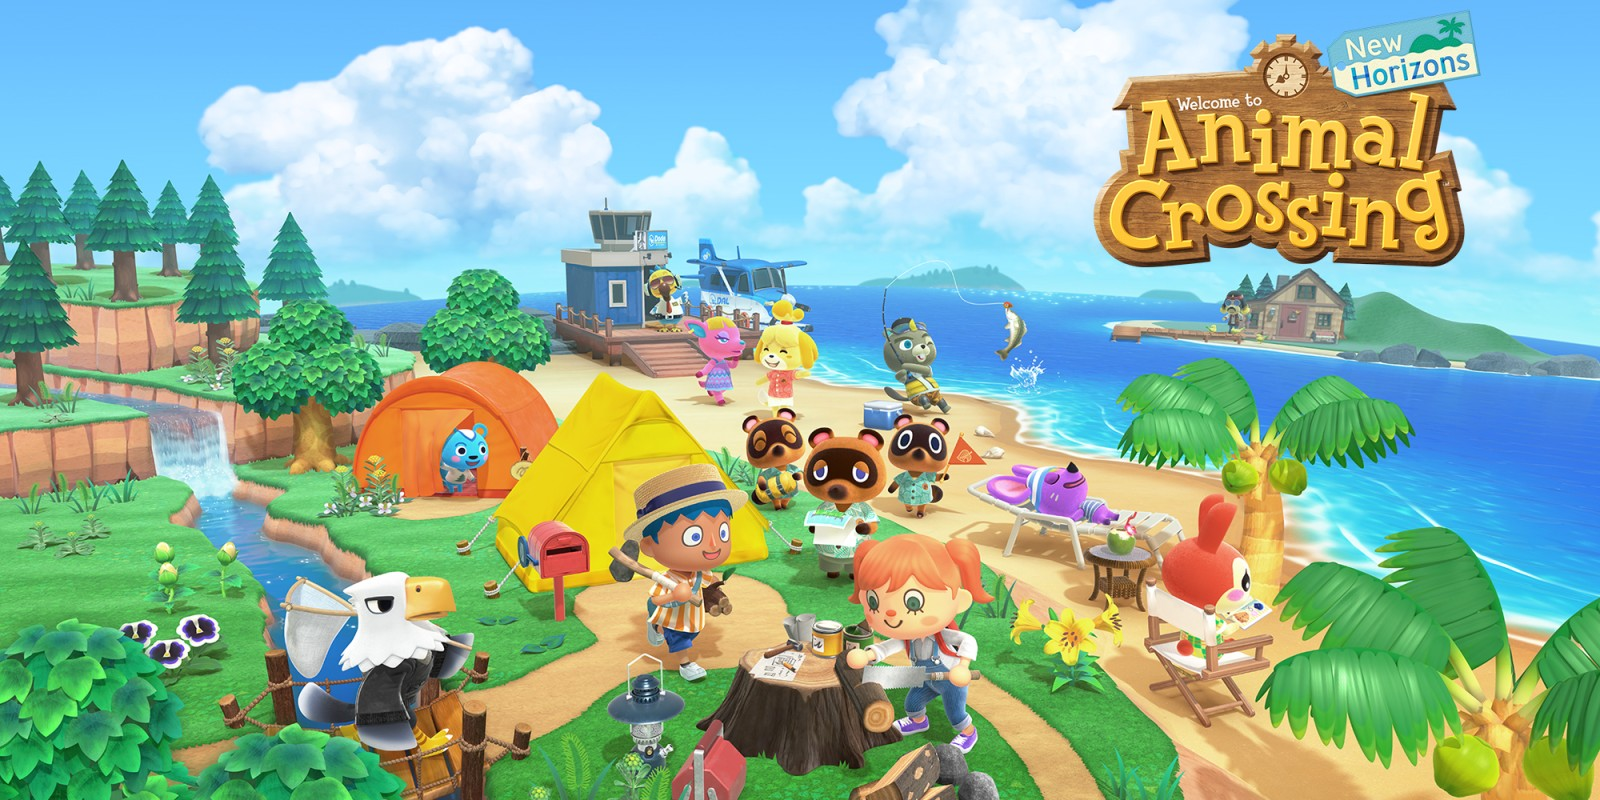 Nintendo’s new game Animal Crossing has transformed players into fashionistas and is providing the fashion industry with another valuable opportunity in the virtual realm. Photo: Courtesy